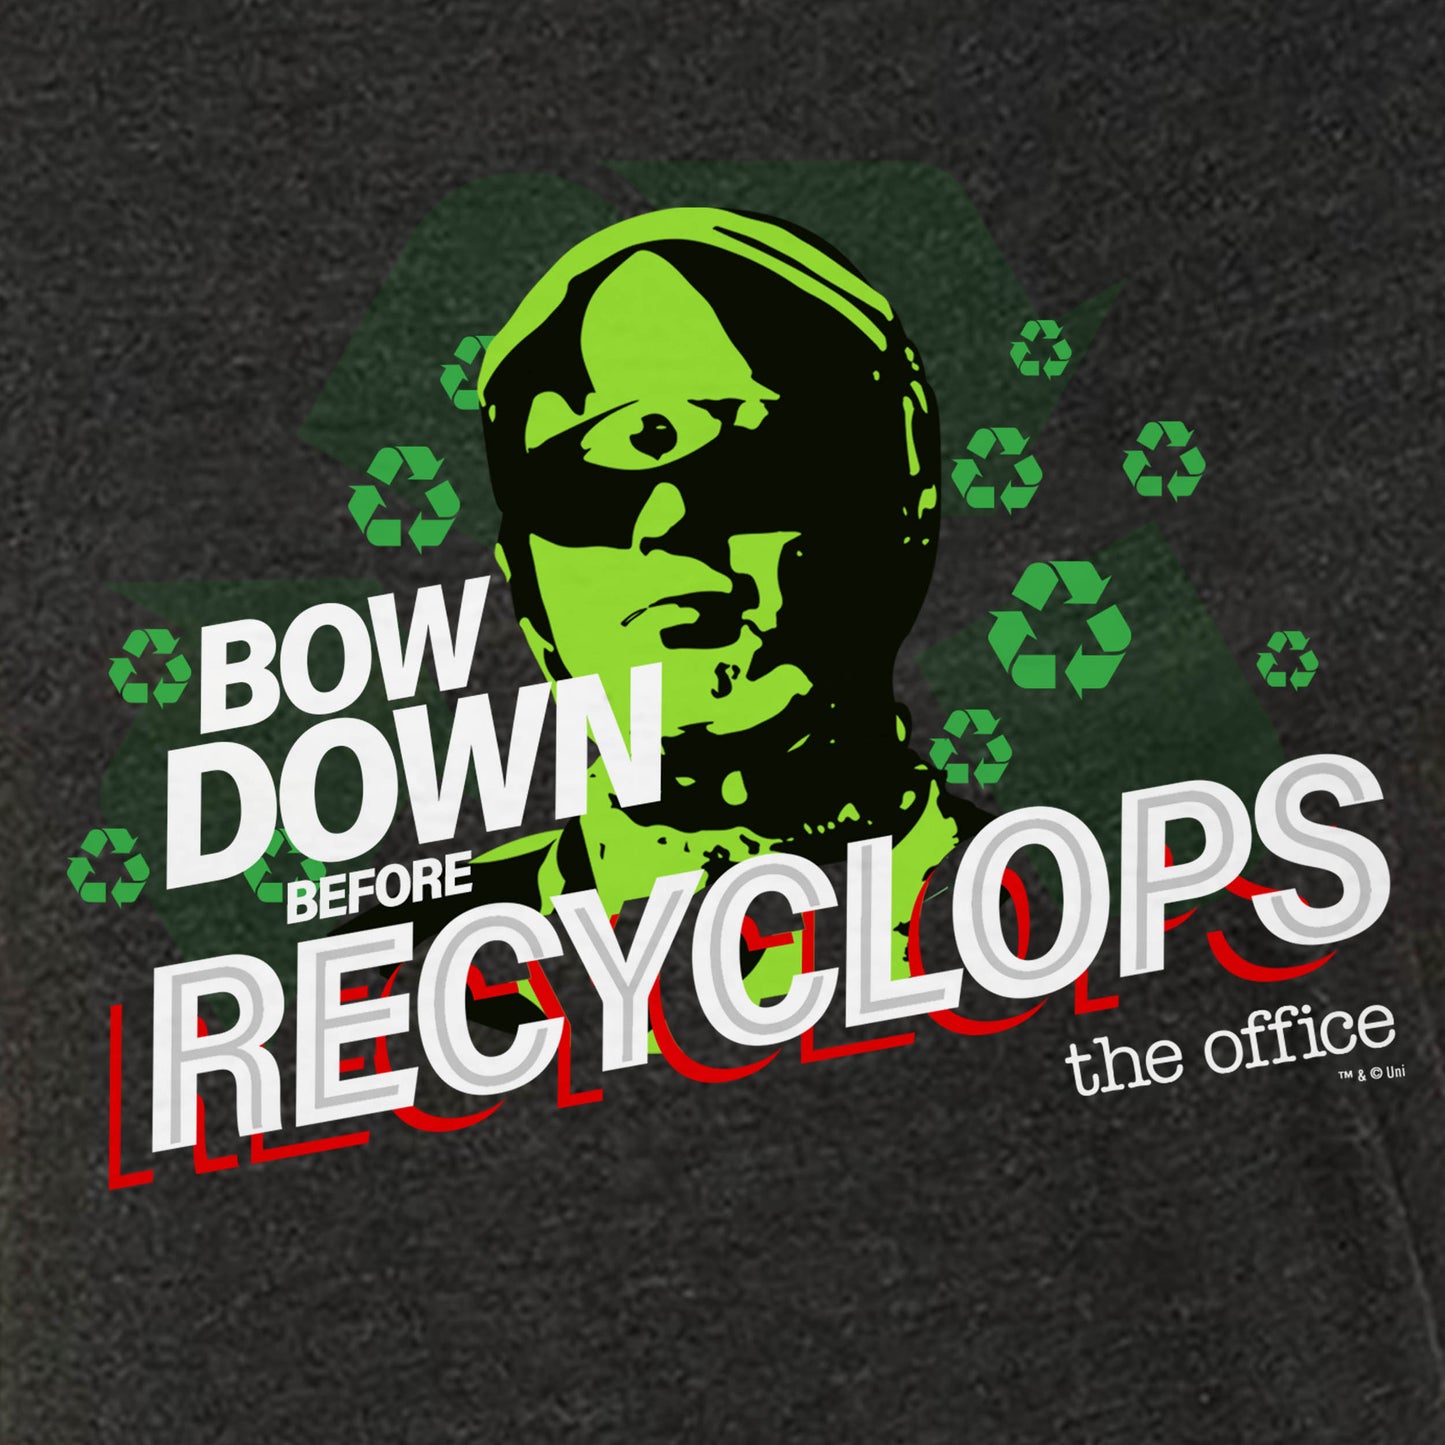 The Office Bow Down Before Recyclops Women's Tri-Blend T-Shirt